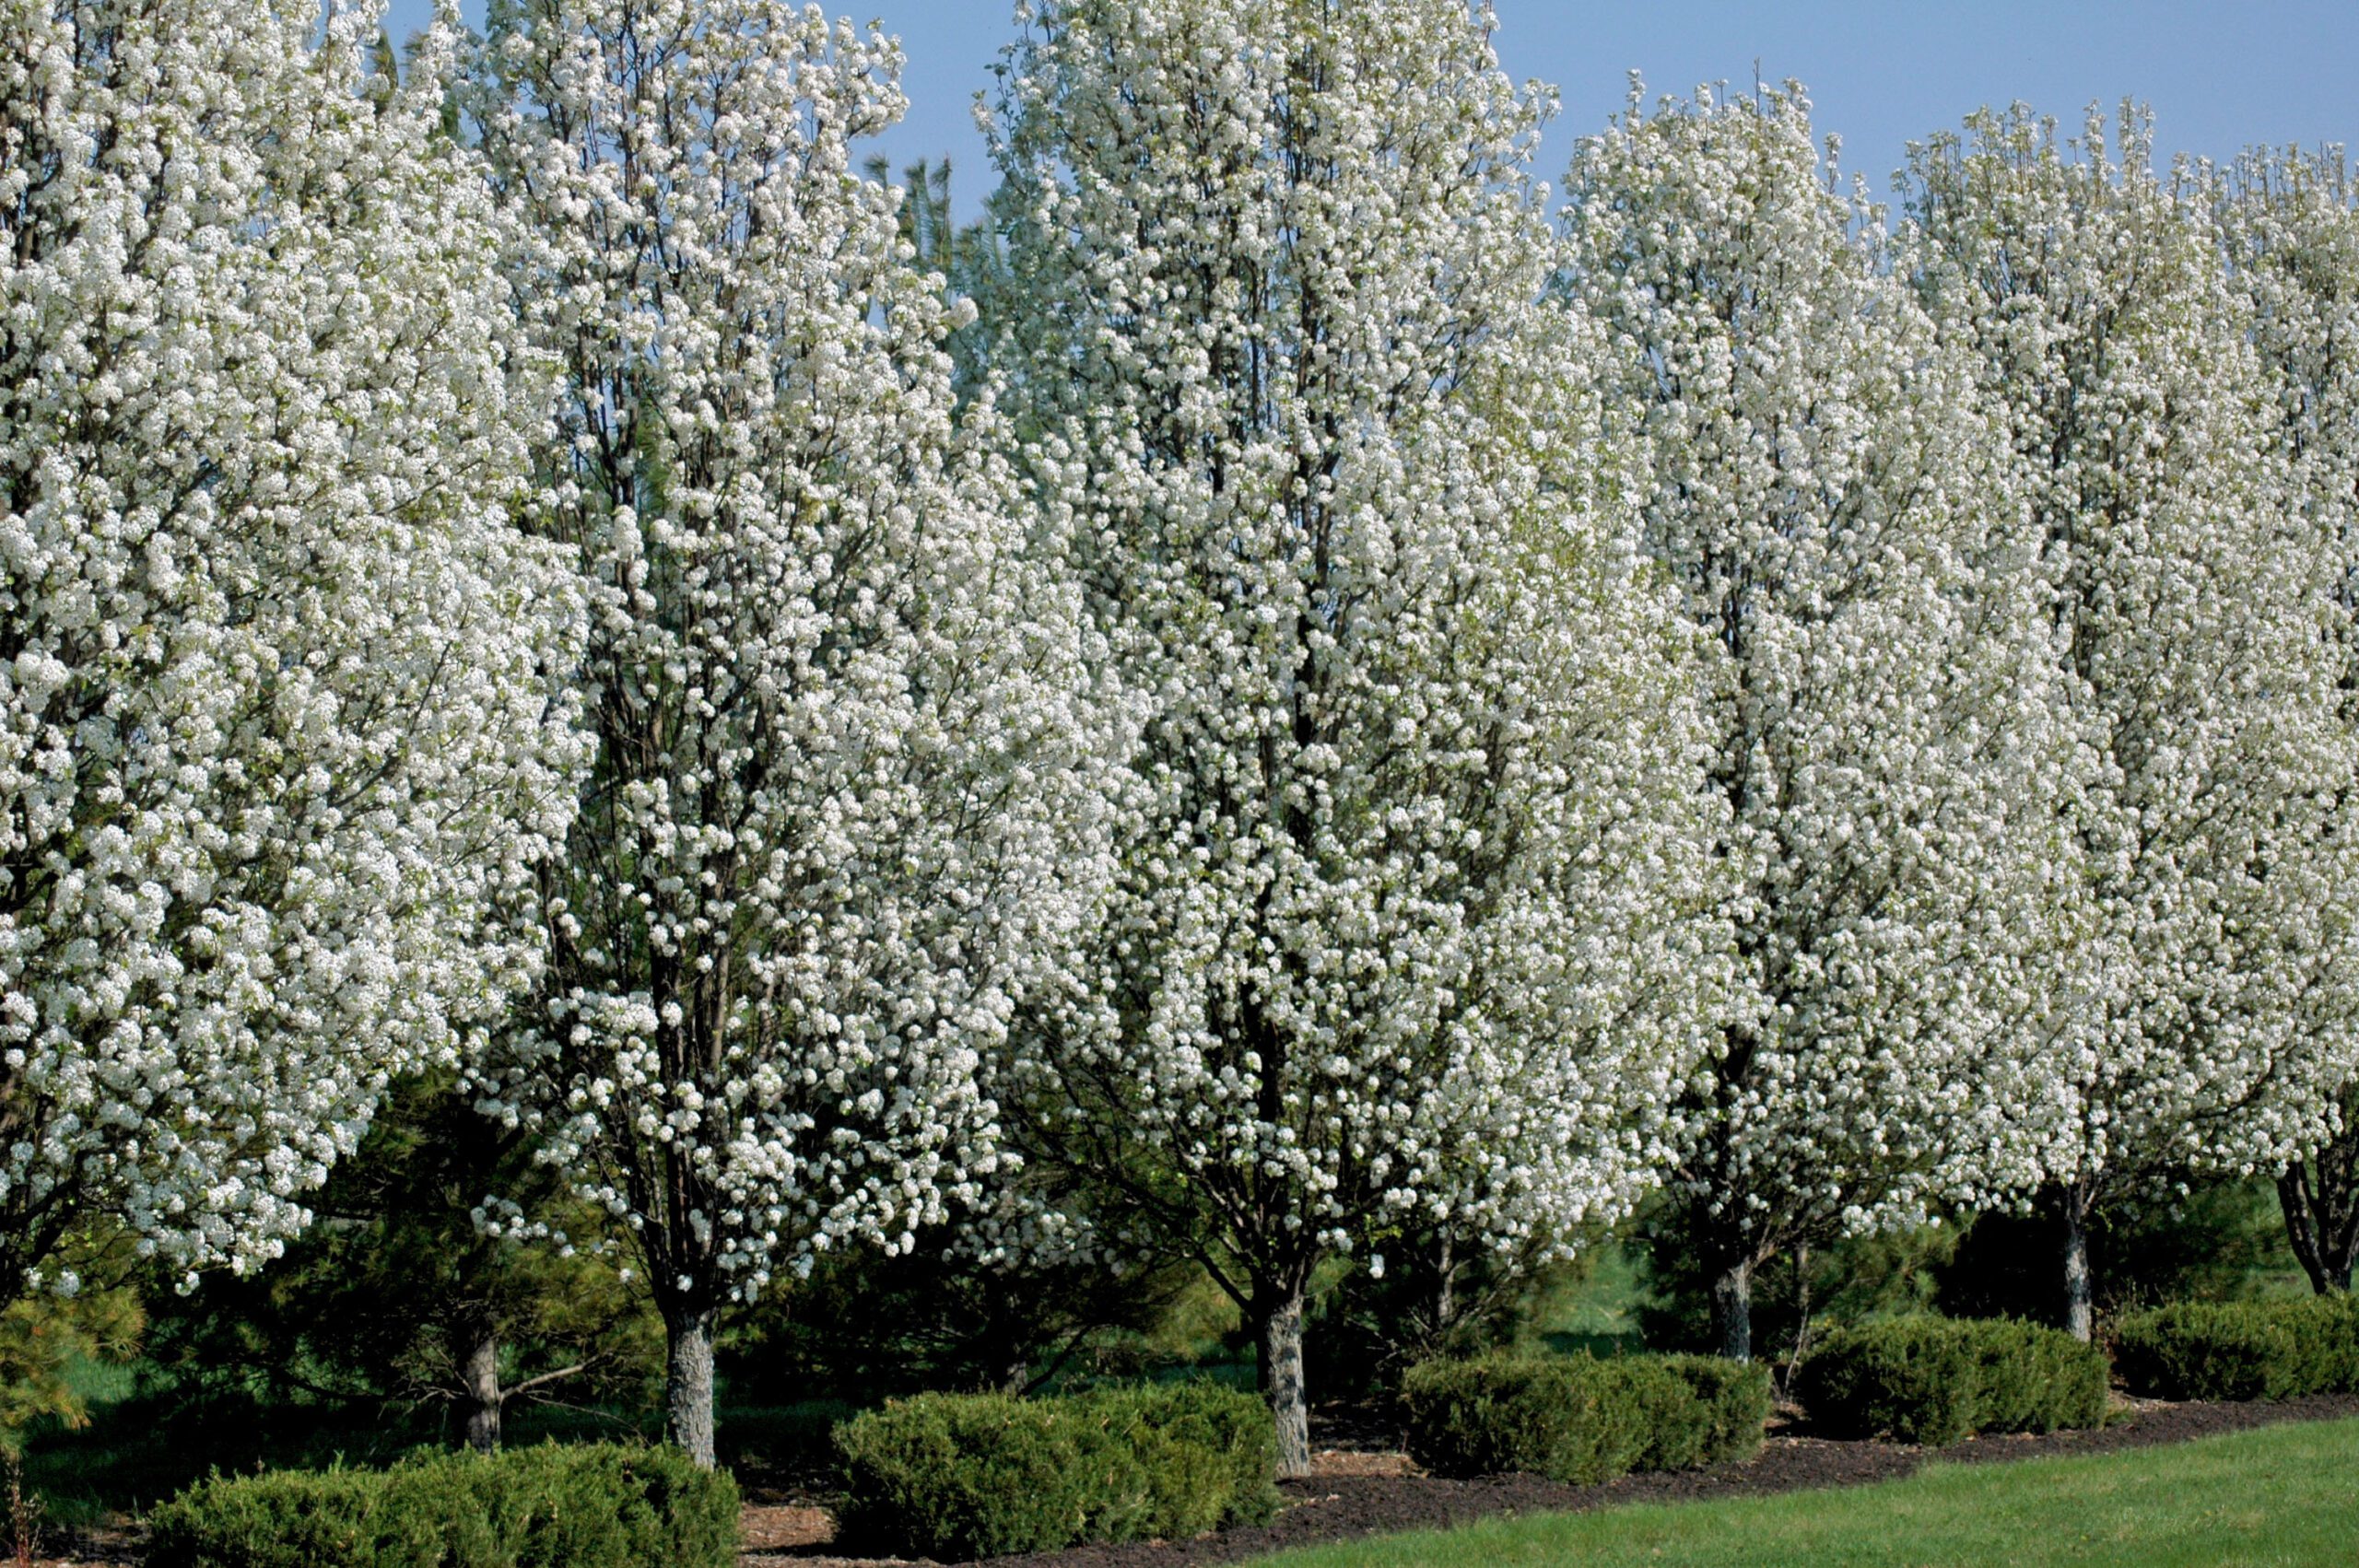 Pyrus calleryana Autumn Blaze mature trees with white blossom in rows in field